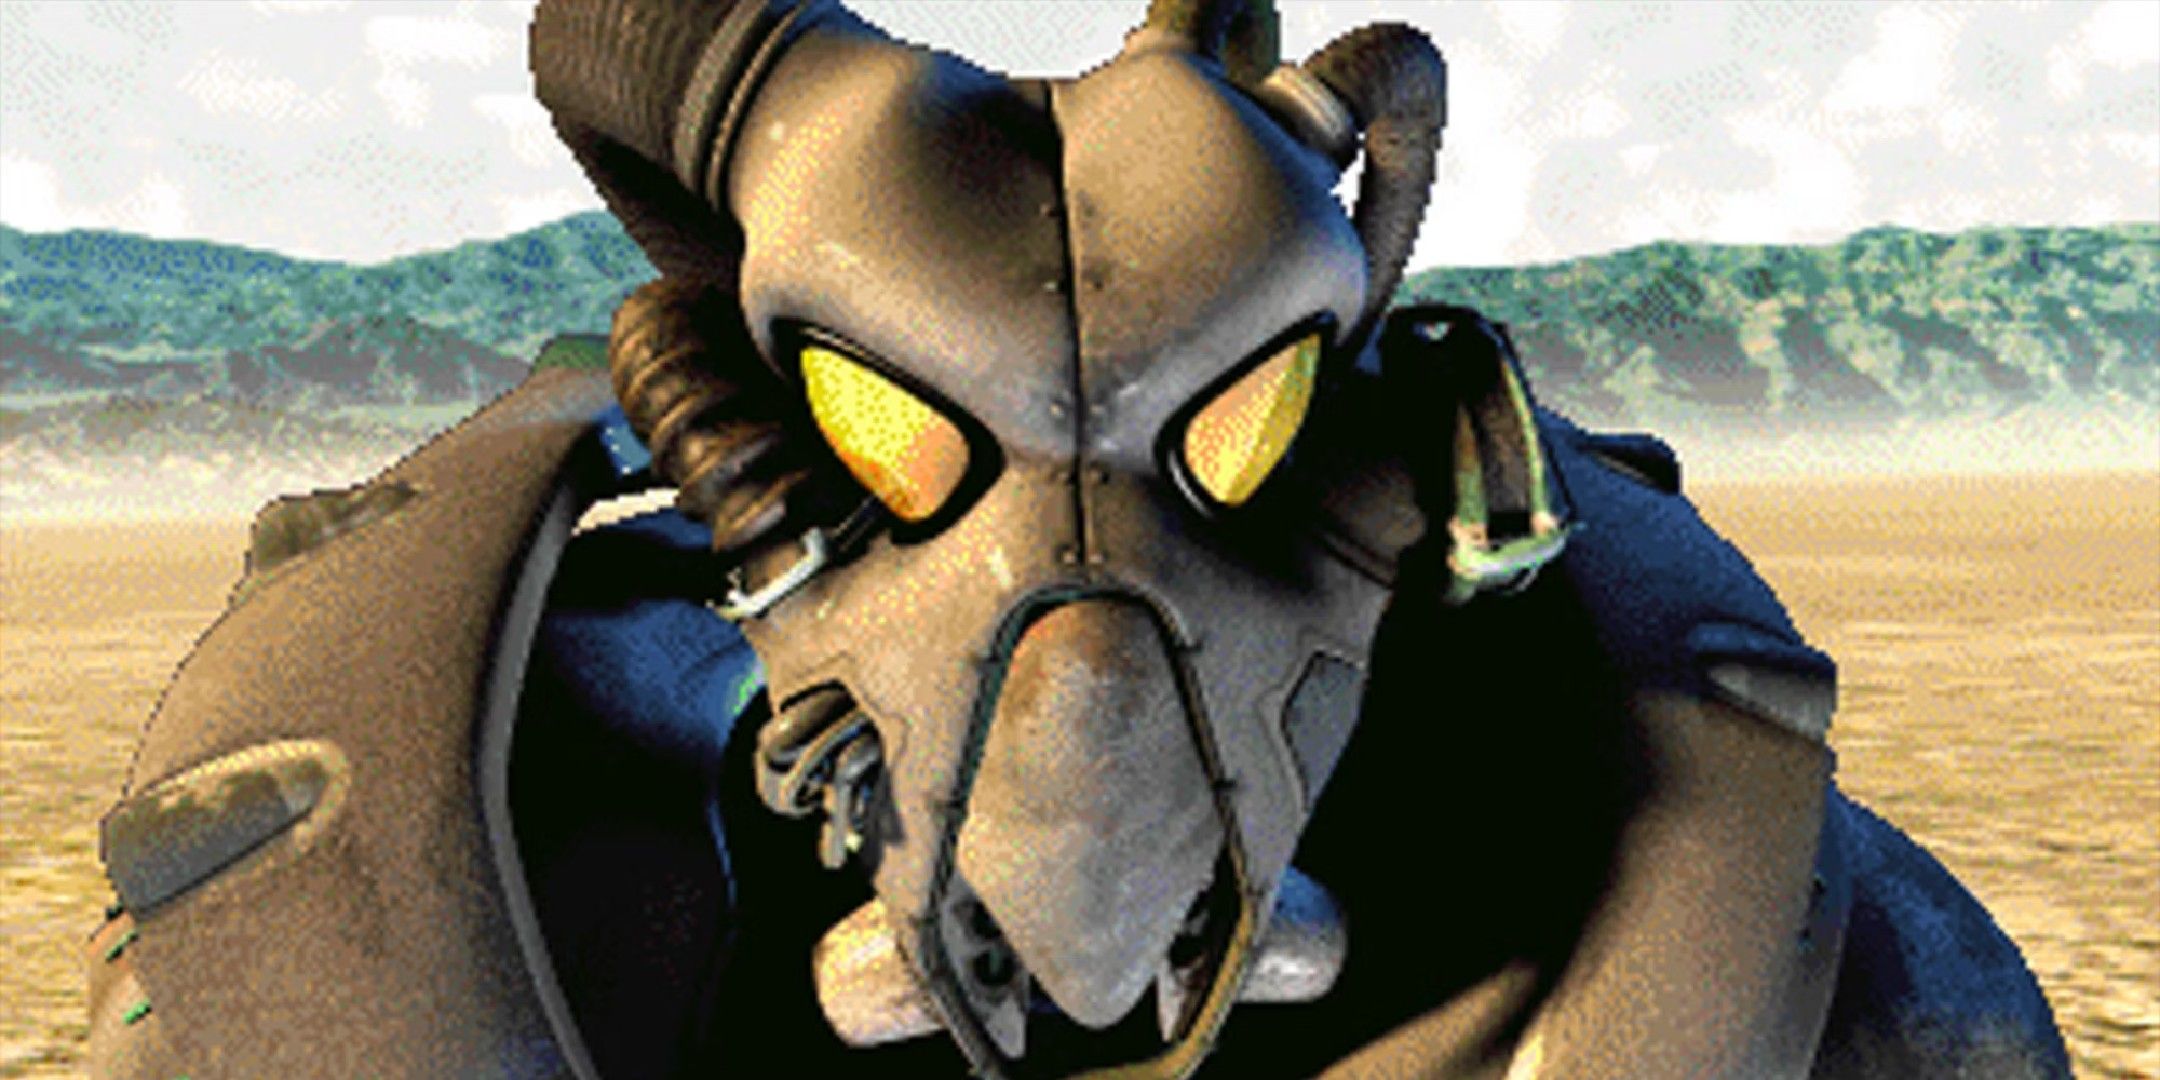 Fallout 2 image showing a fully armored soldier of the enclave